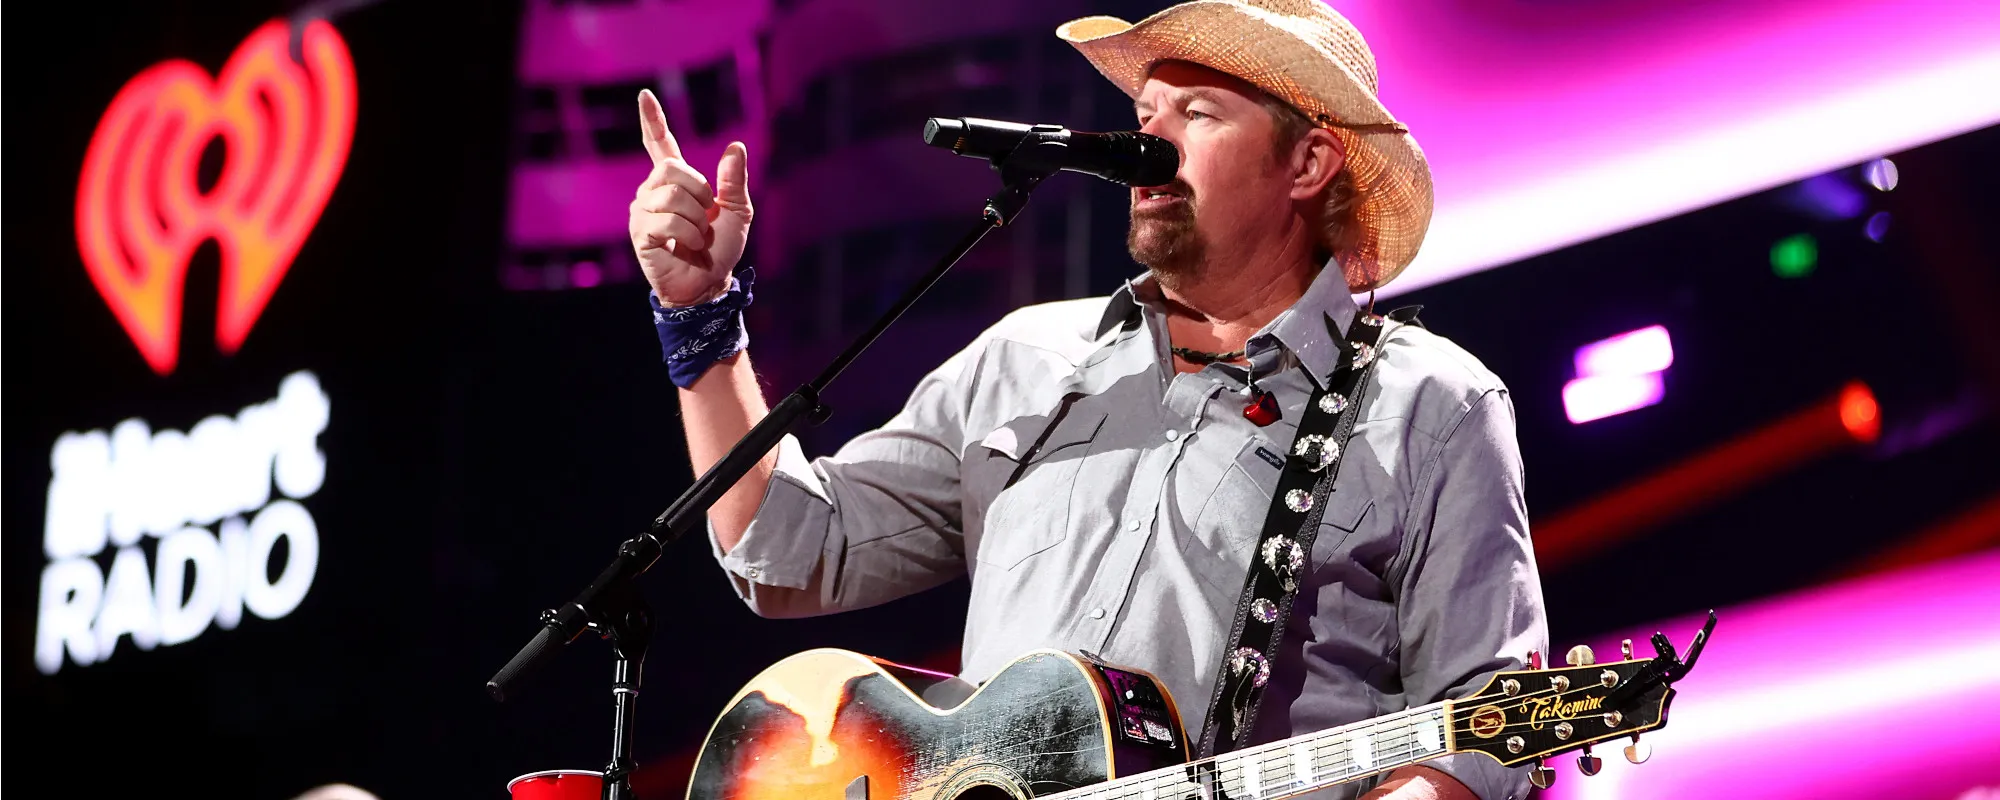 Toby Keith’s Family Shares Statement Mourning Country Icon’s Death: “He Fought His Fight With Grace And Courage”